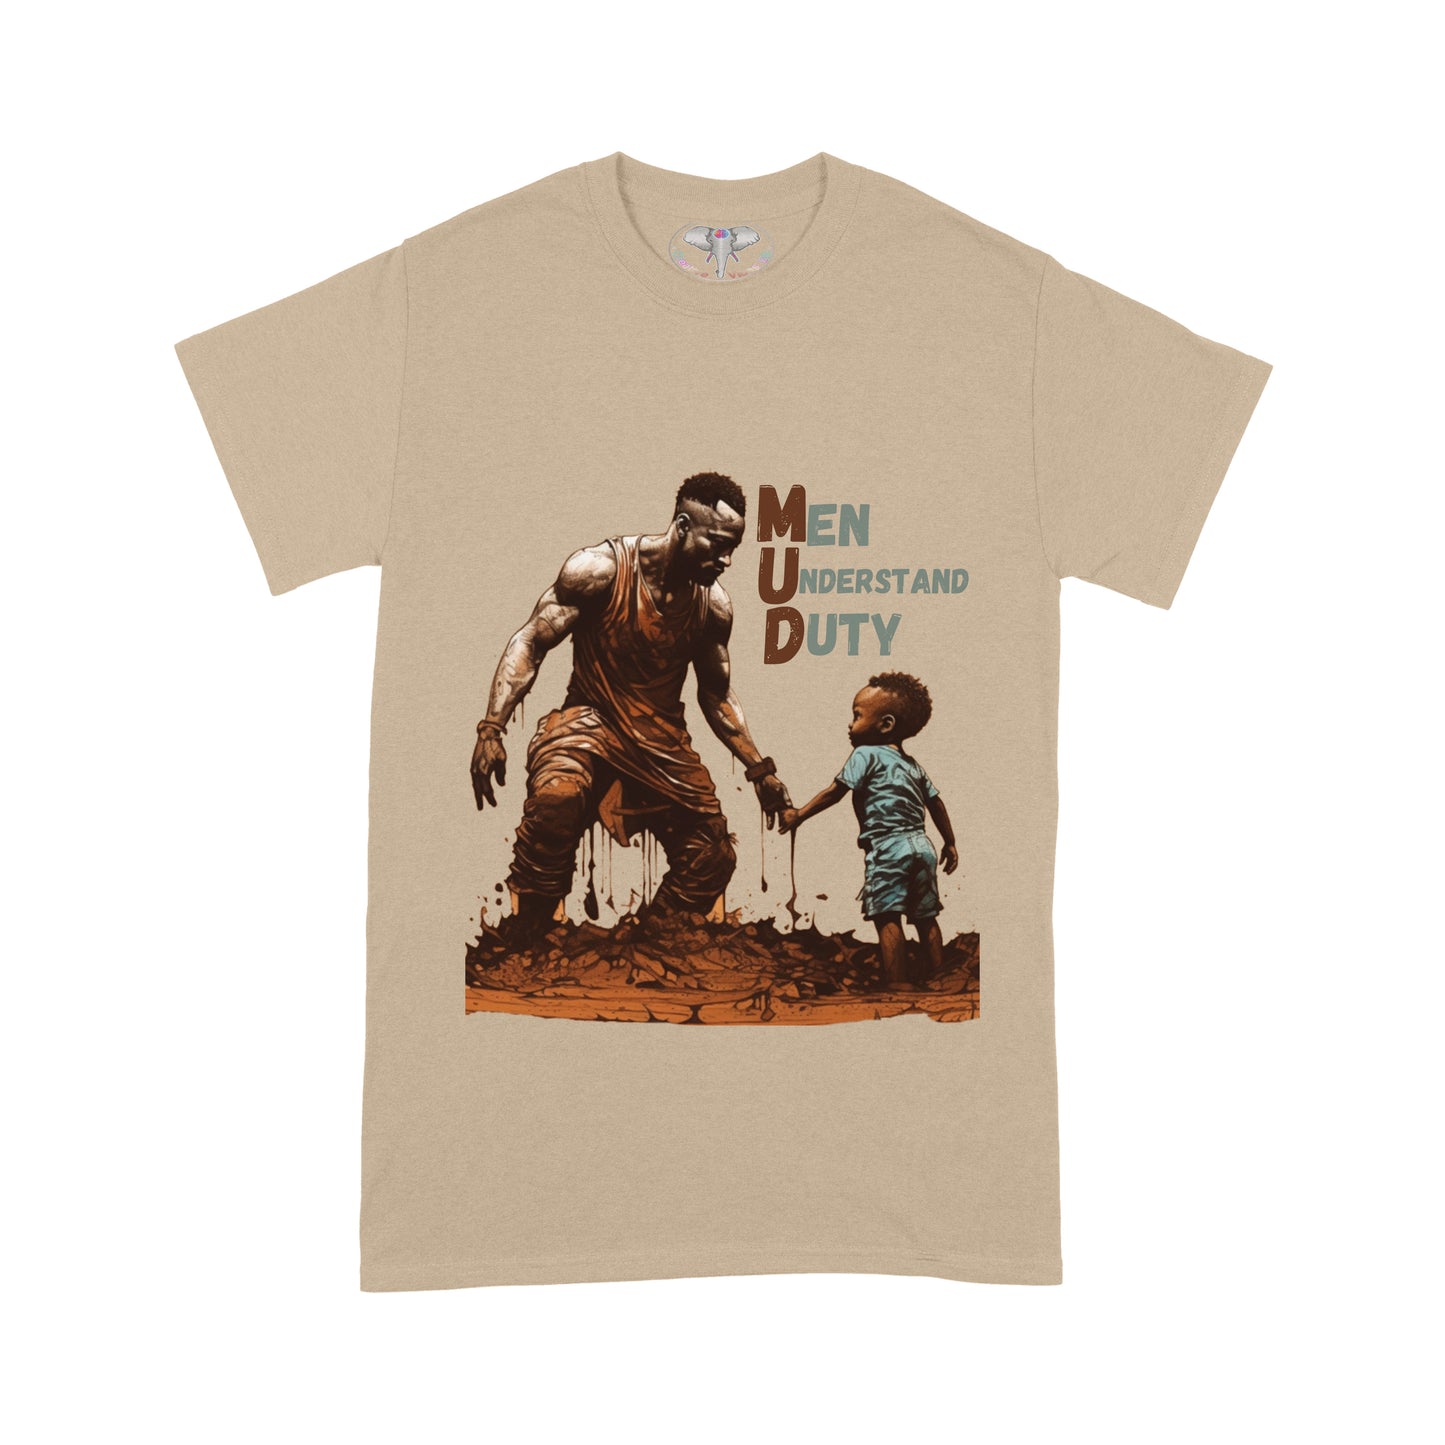 M.en U.nderstand D.uty Graphic T-shirt (Father's Day)